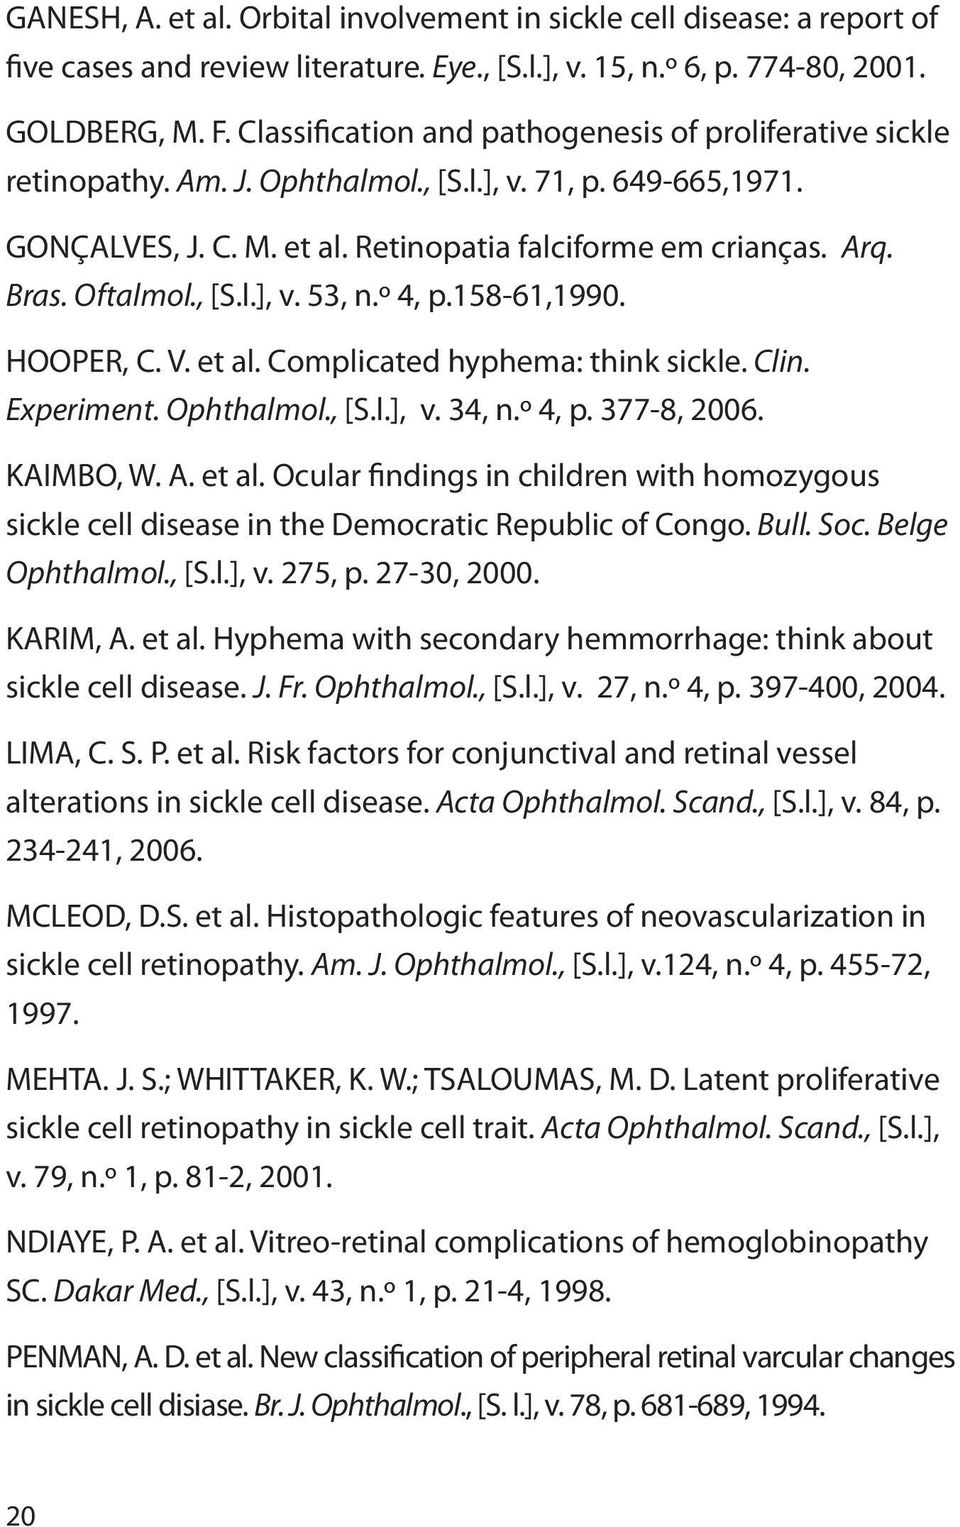 Oftalmol., [S.l.], v. 53, n.º 4, p.158-61,1990. HOOPER, C. V. et al. Complicated hyphema: think sickle. Clin. Experiment. Ophthalmol., [S.l.], v. 34, n.º 4, p. 377-8, 2006. KAIMBO, W. A. et al. Ocular findings in children with homozygous sickle cell disease in the Democratic Republic of Congo.